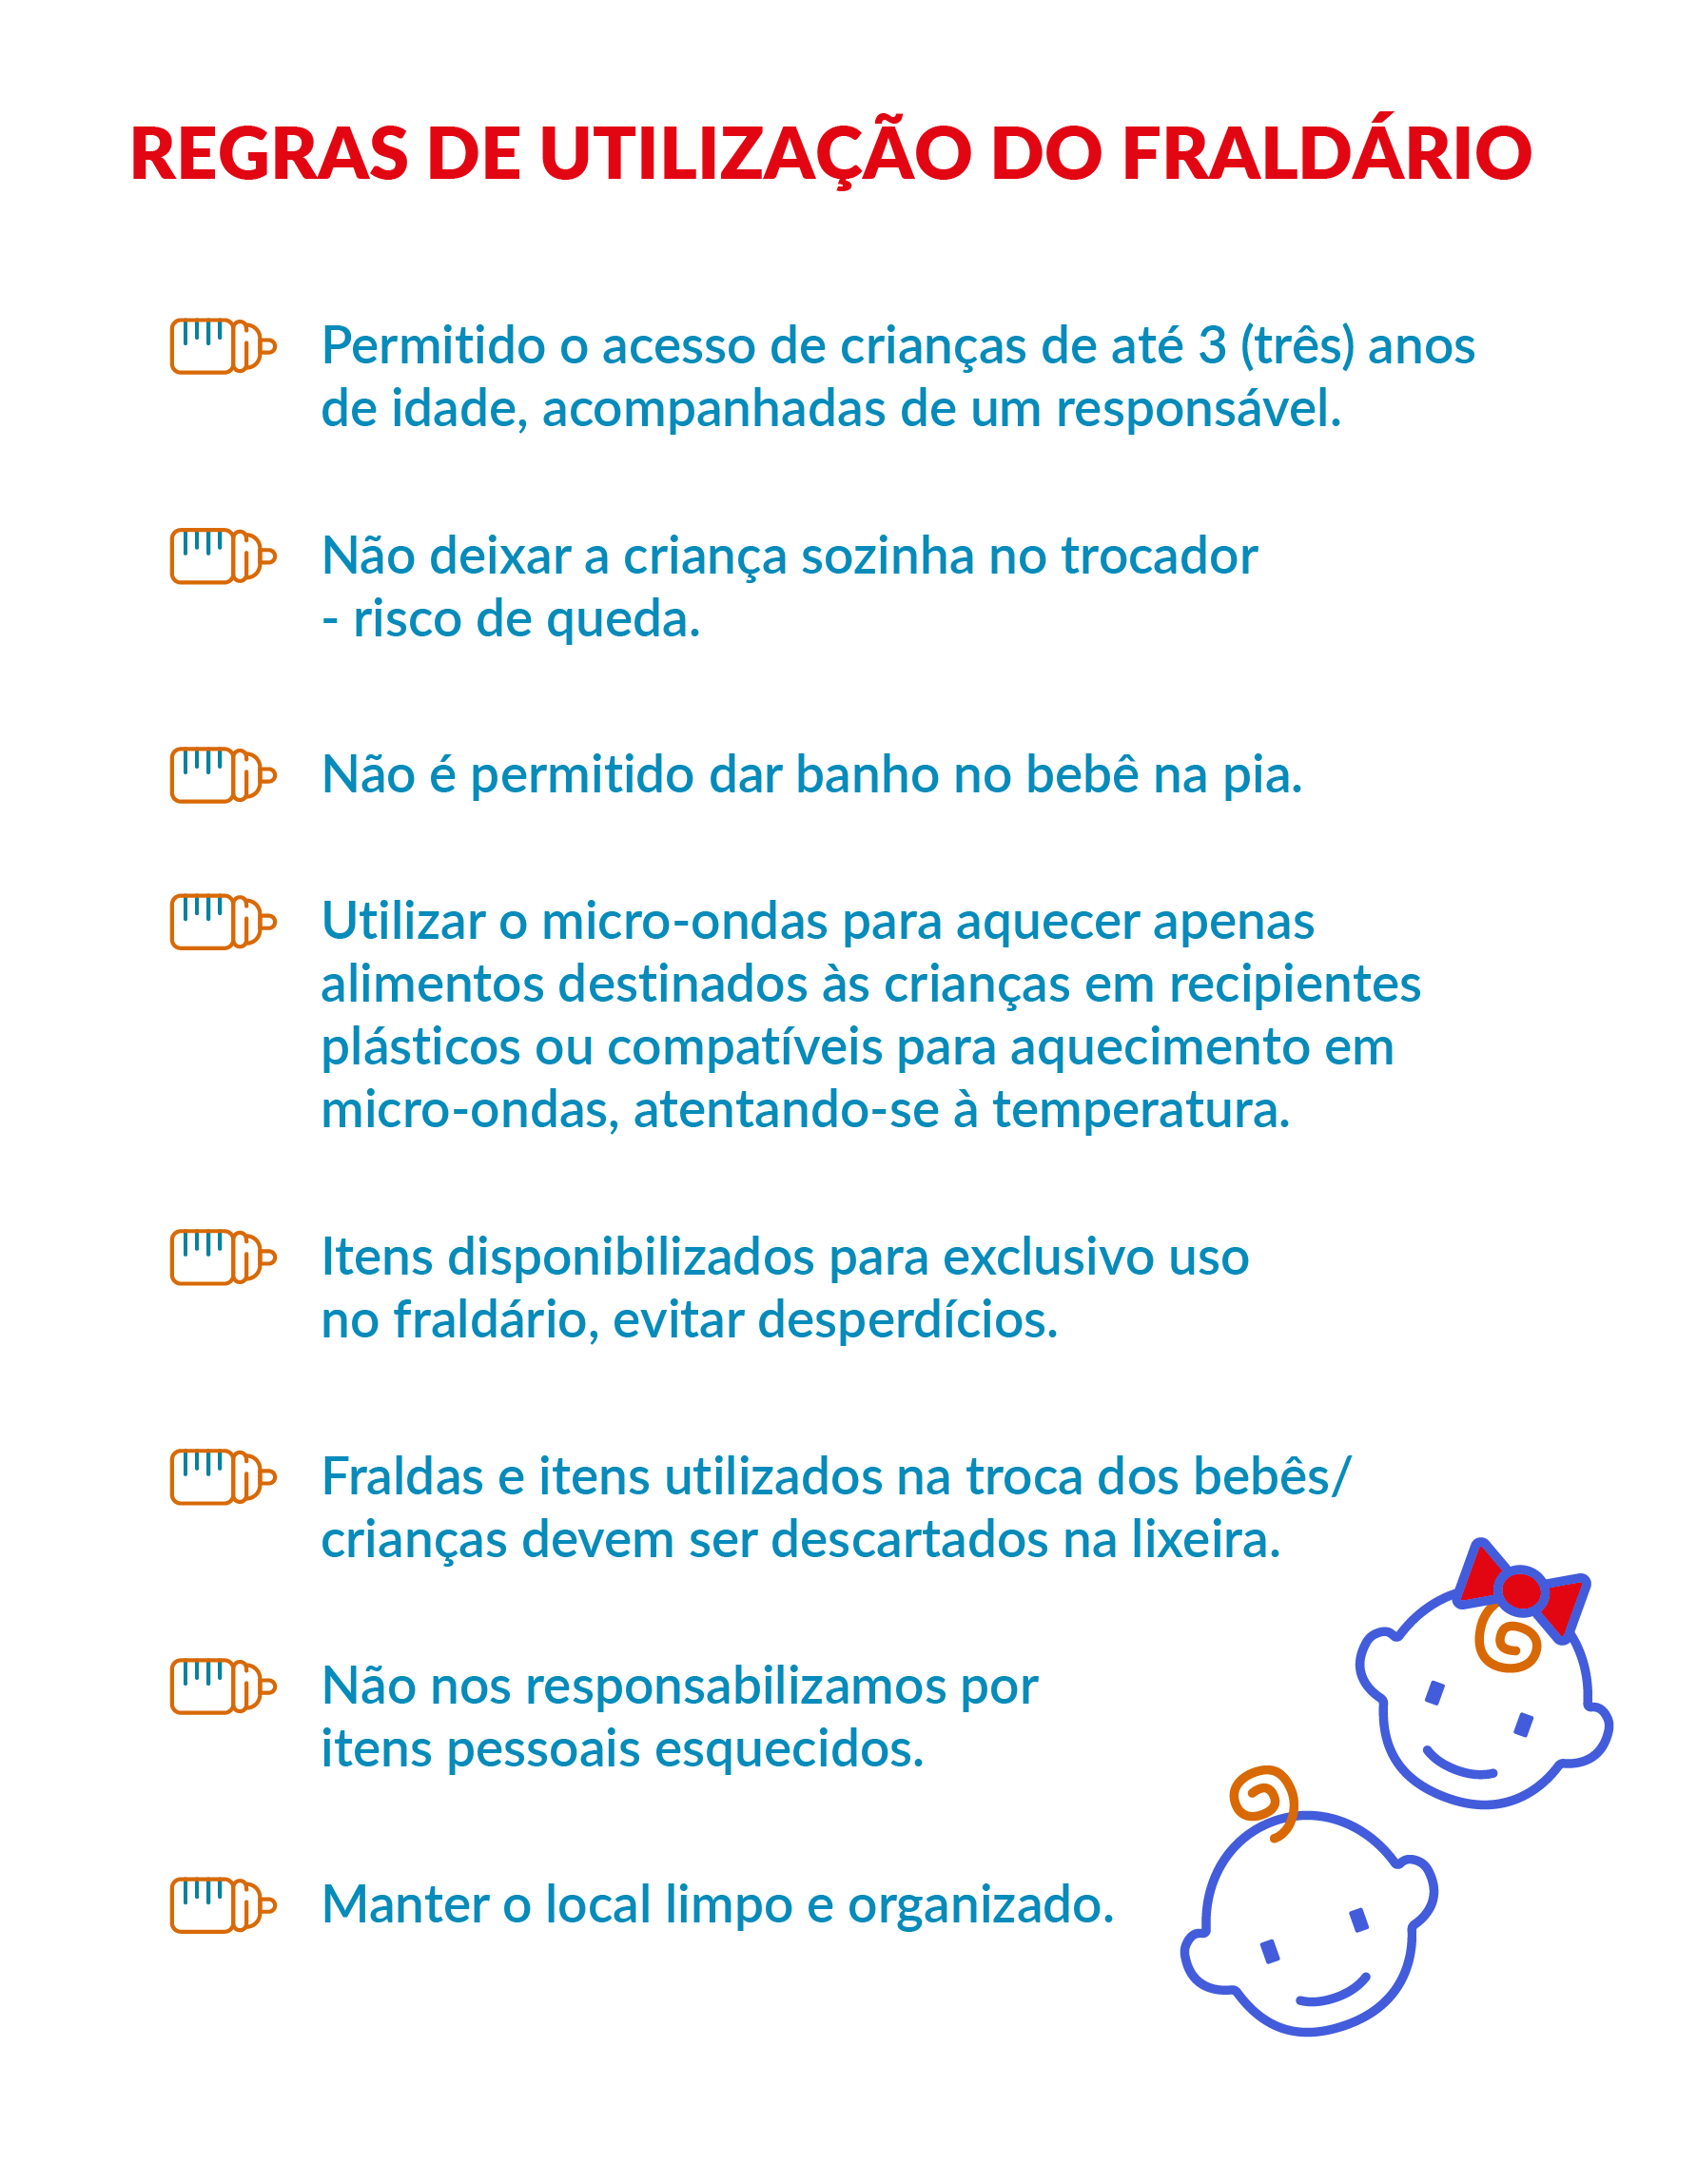 regras fraldrio<a style='float:right' href='https://www3.al.sp.gov.br/repositorio/noticia/I-06-2024/doc329943.png' target=_blank><img src='/_img/material-file-download-white.png' width='14px' alt='Clique para baixar a imagem'></a>